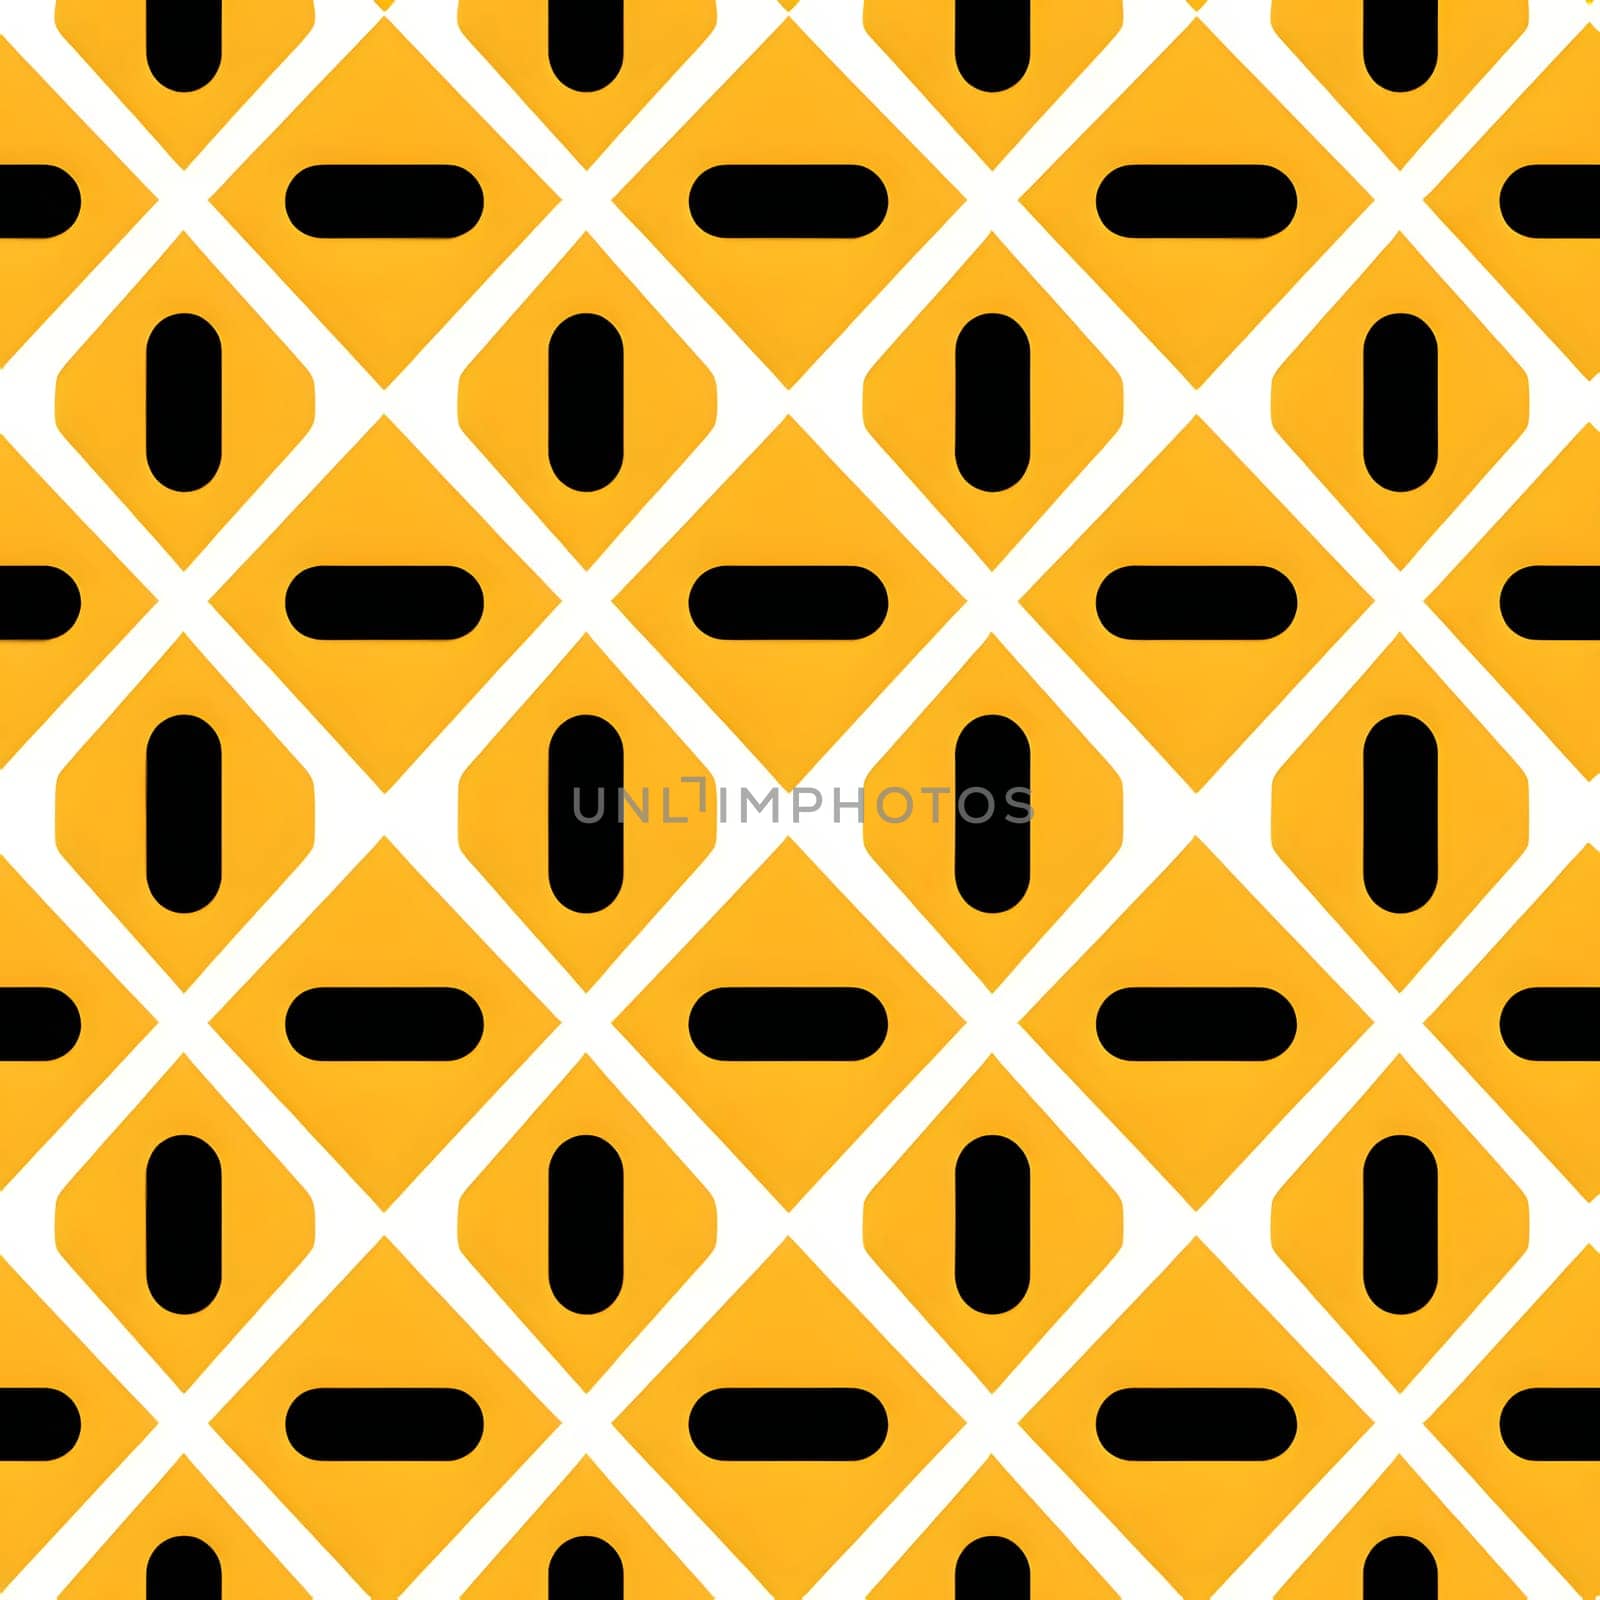 Patterns and banners backgrounds: Seamless pattern with black and yellow geometric shapes. Vector illustration.